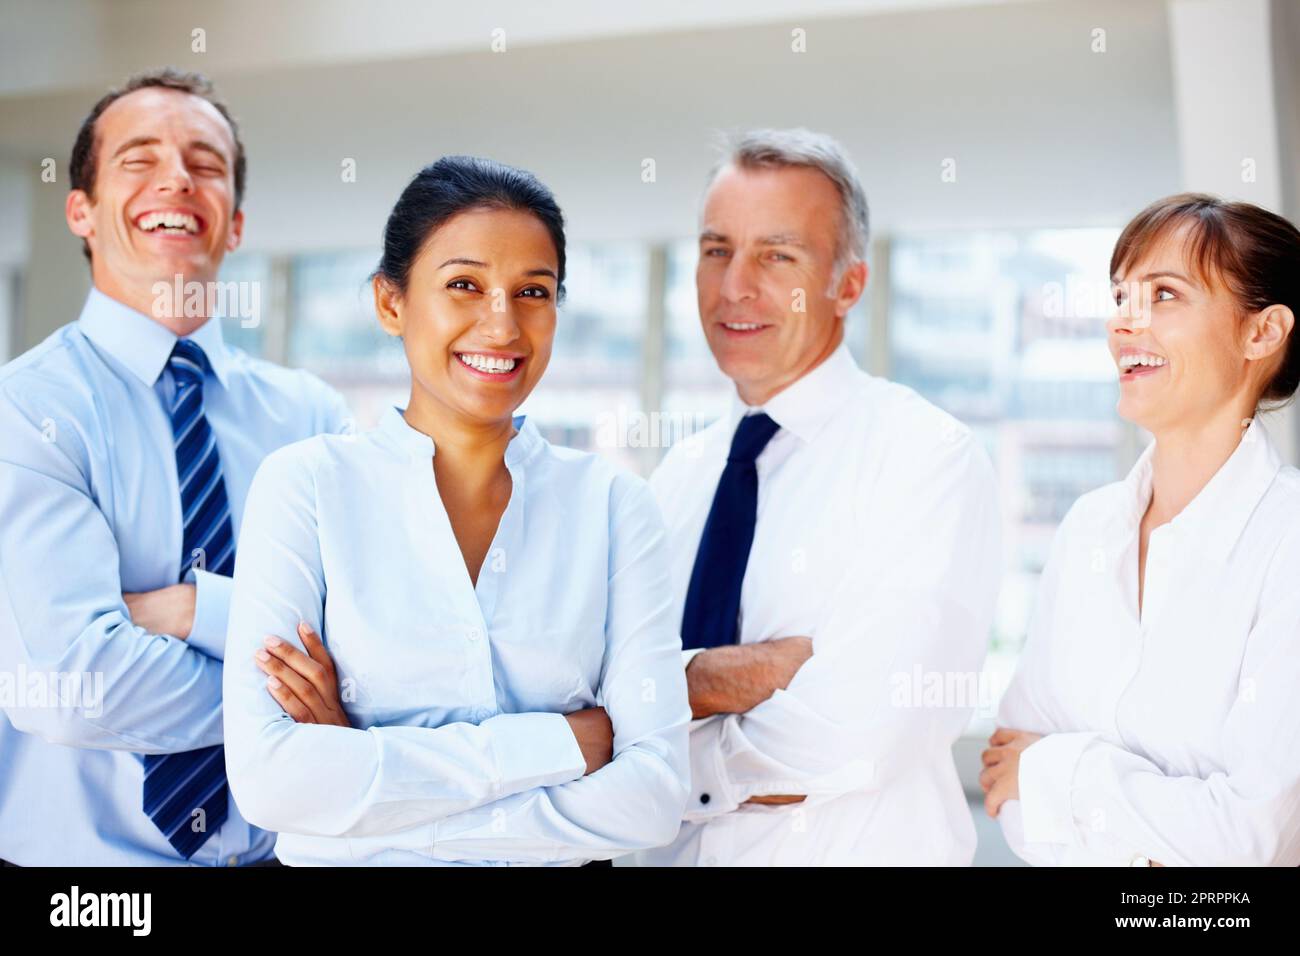 Friendly team of professionals. Professionals laughing while at work. Stock Photo